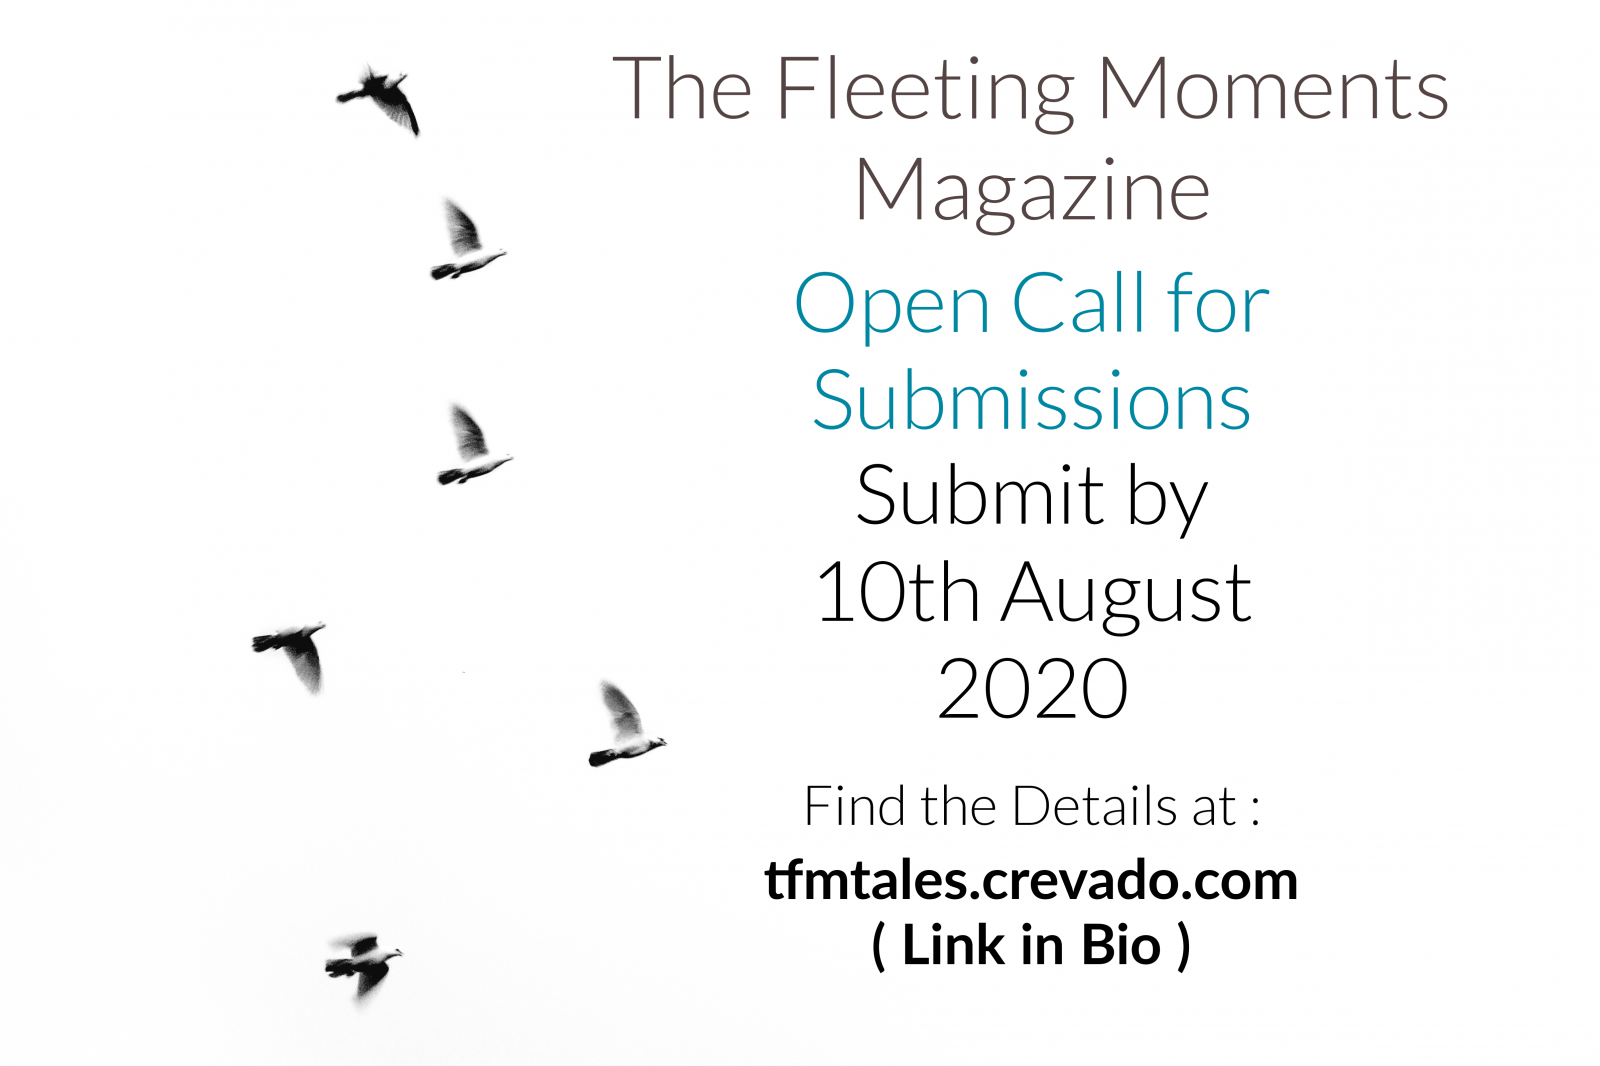 OPEN CALL : SUBMISSIONS FOR THE FLEETING MOMENTS MAGAZINE